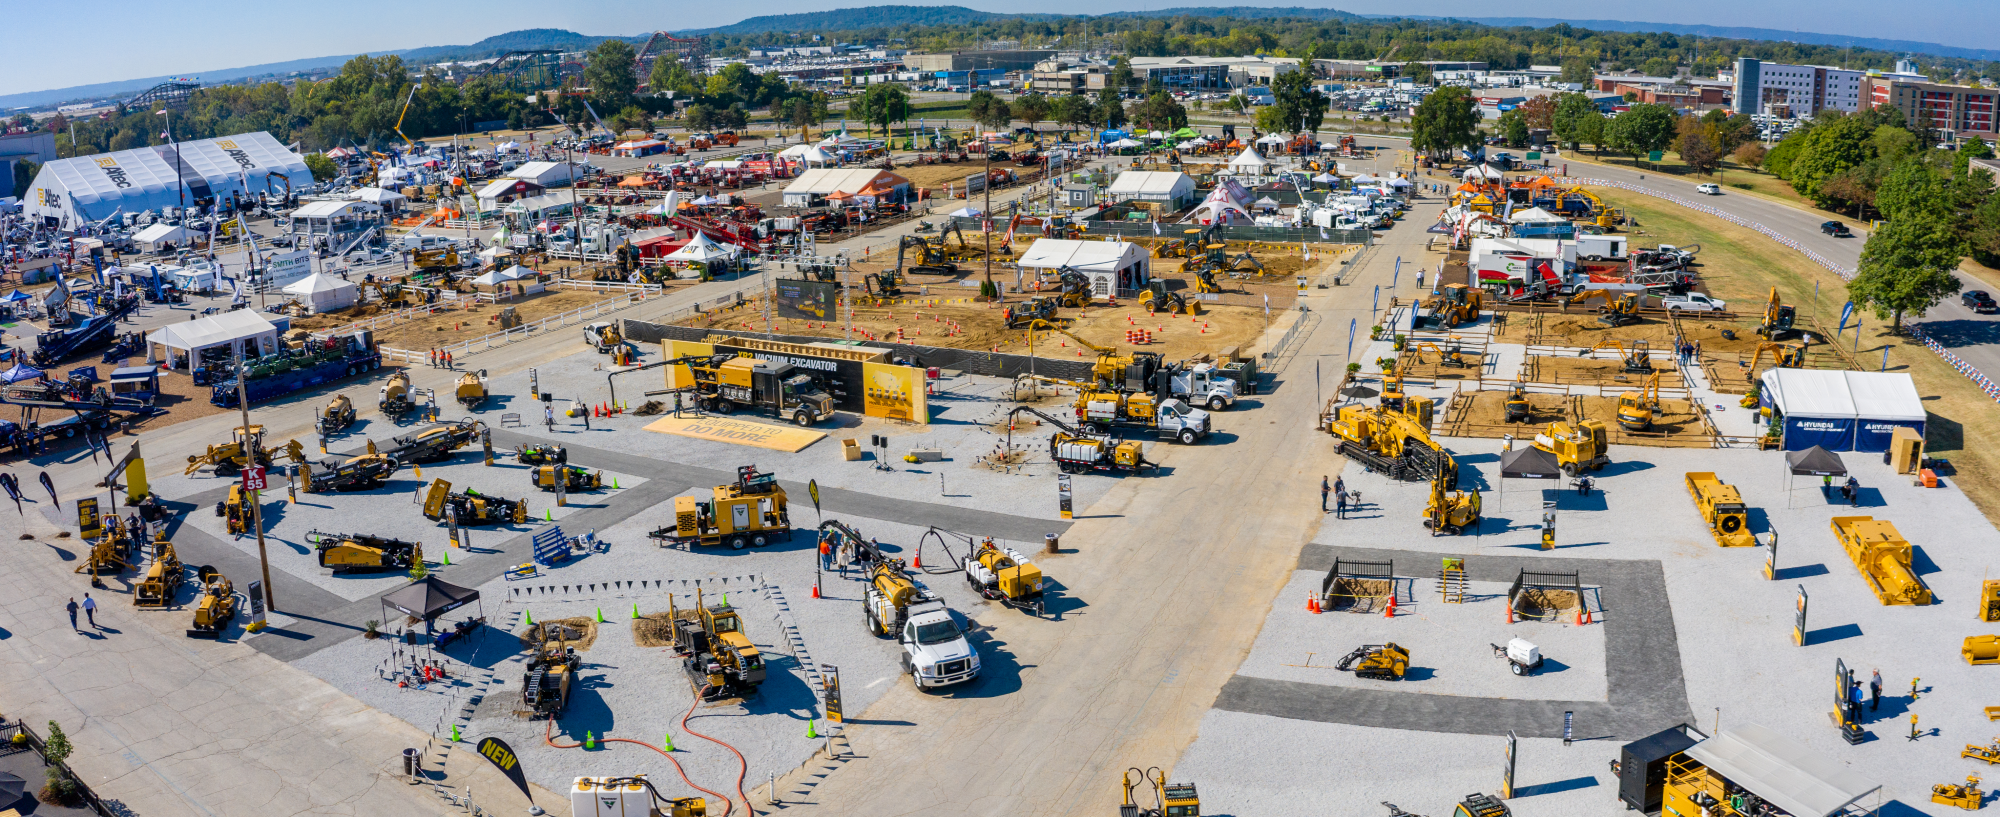 ICUEE is now The Utility Expo, Reflecting Plan for Future of the Show